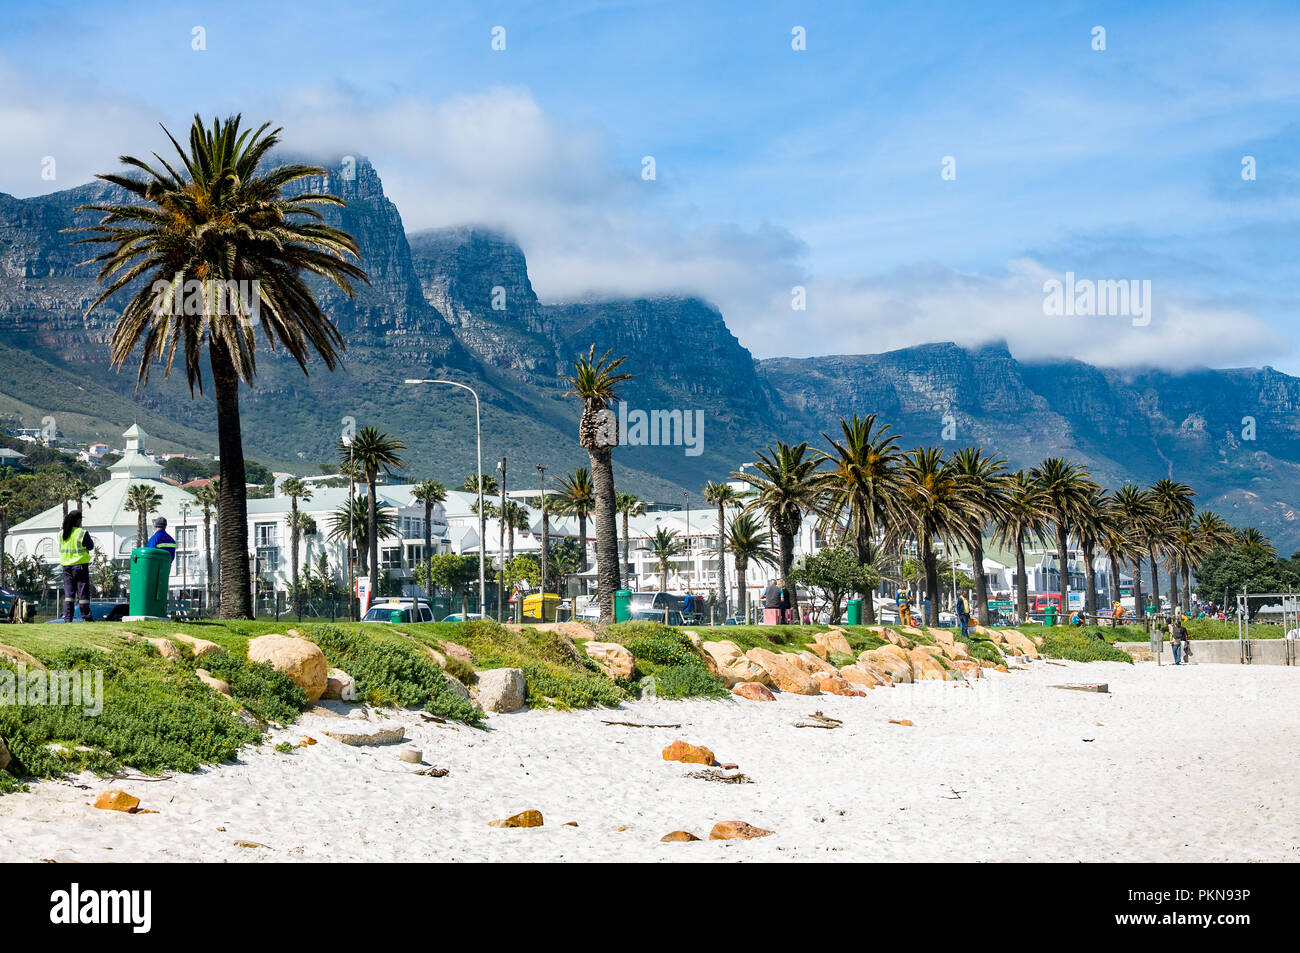 The beach and palm trees with clouded Table Mountain, Camps Bay, South Africa Stock Photo